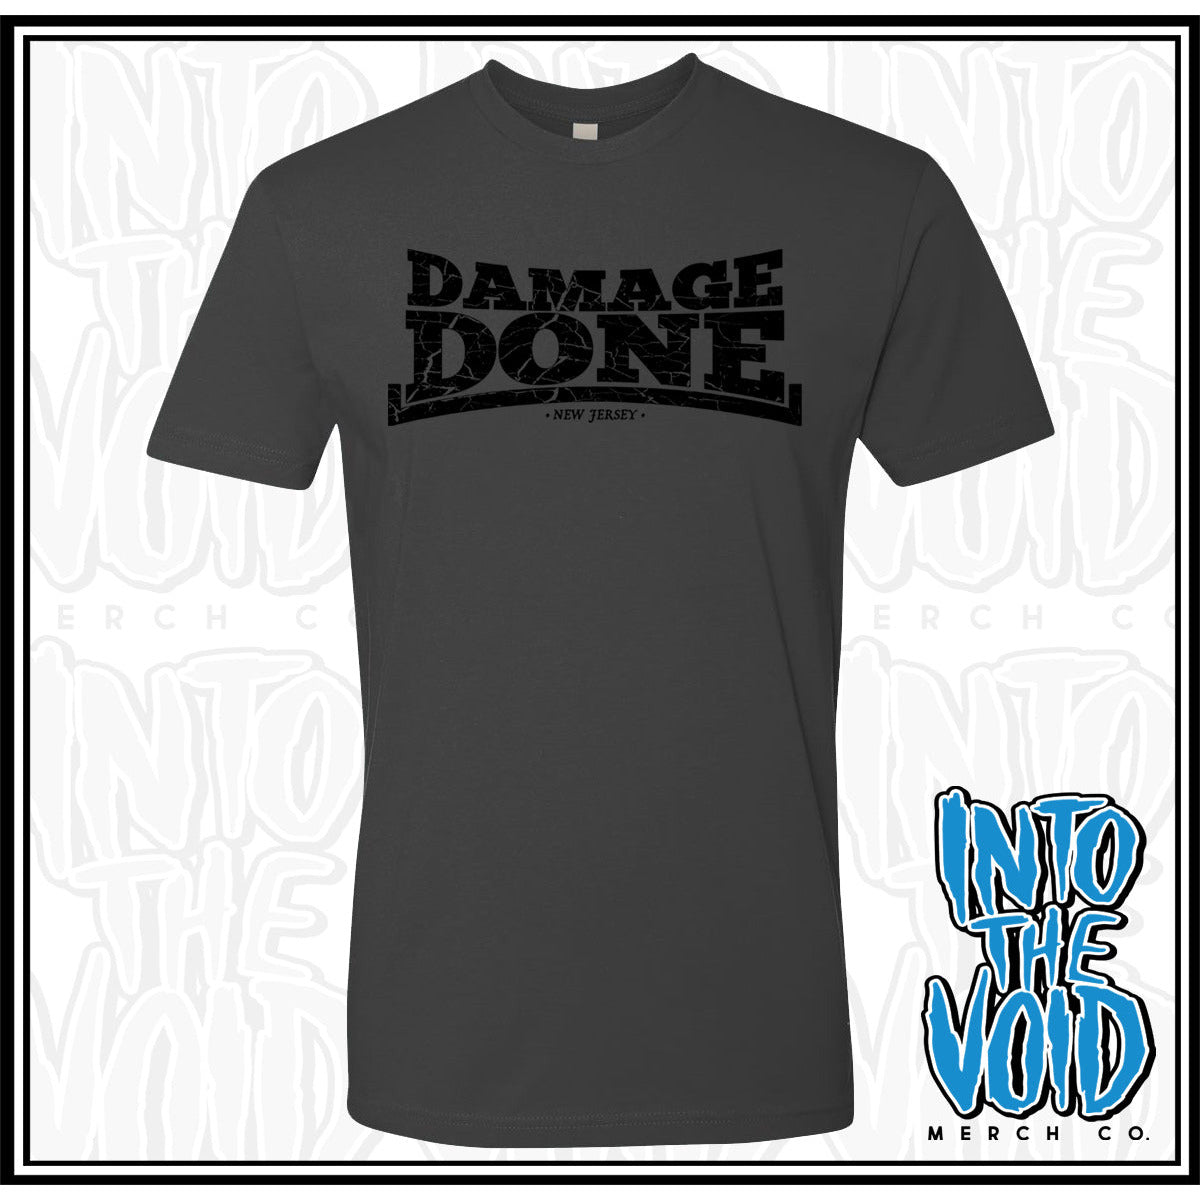 DAMAGE DONE - Logo - Men's Short Sleeve T-Shirt - INTO THE VOID Merch Co.